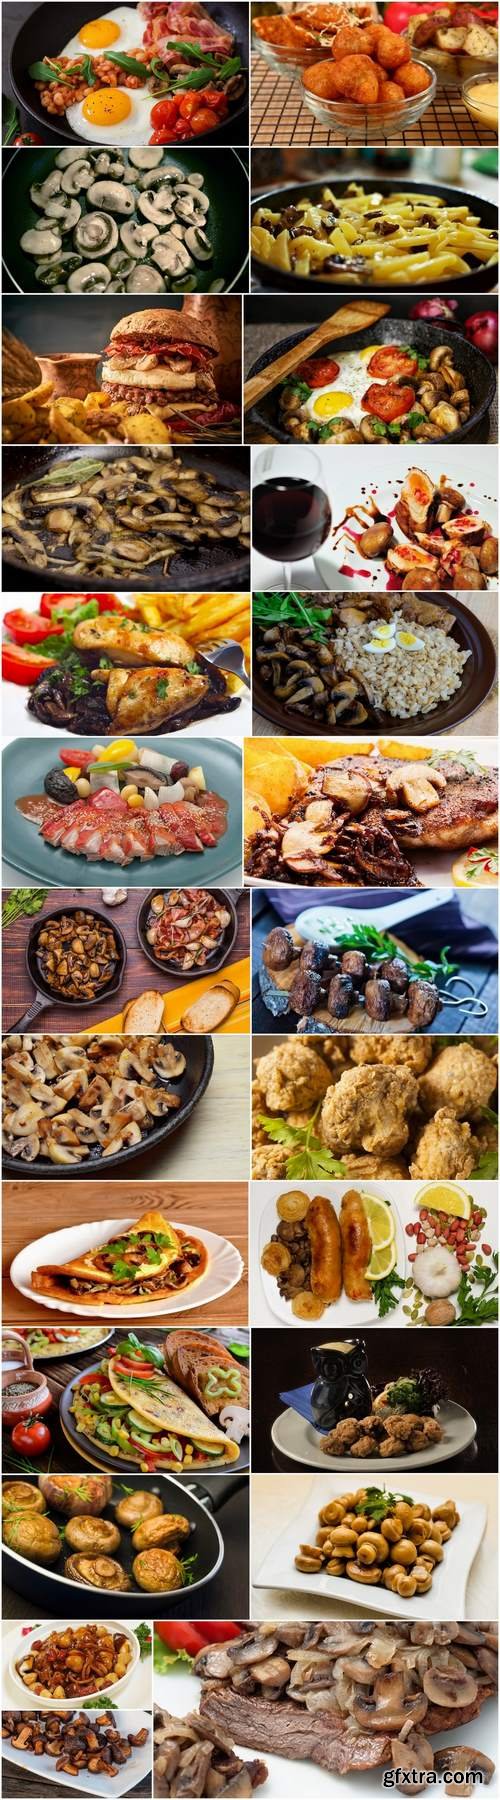 Mushrooms fried dishes with mushrooms chicken salad omelette 25 HQ Jpeg